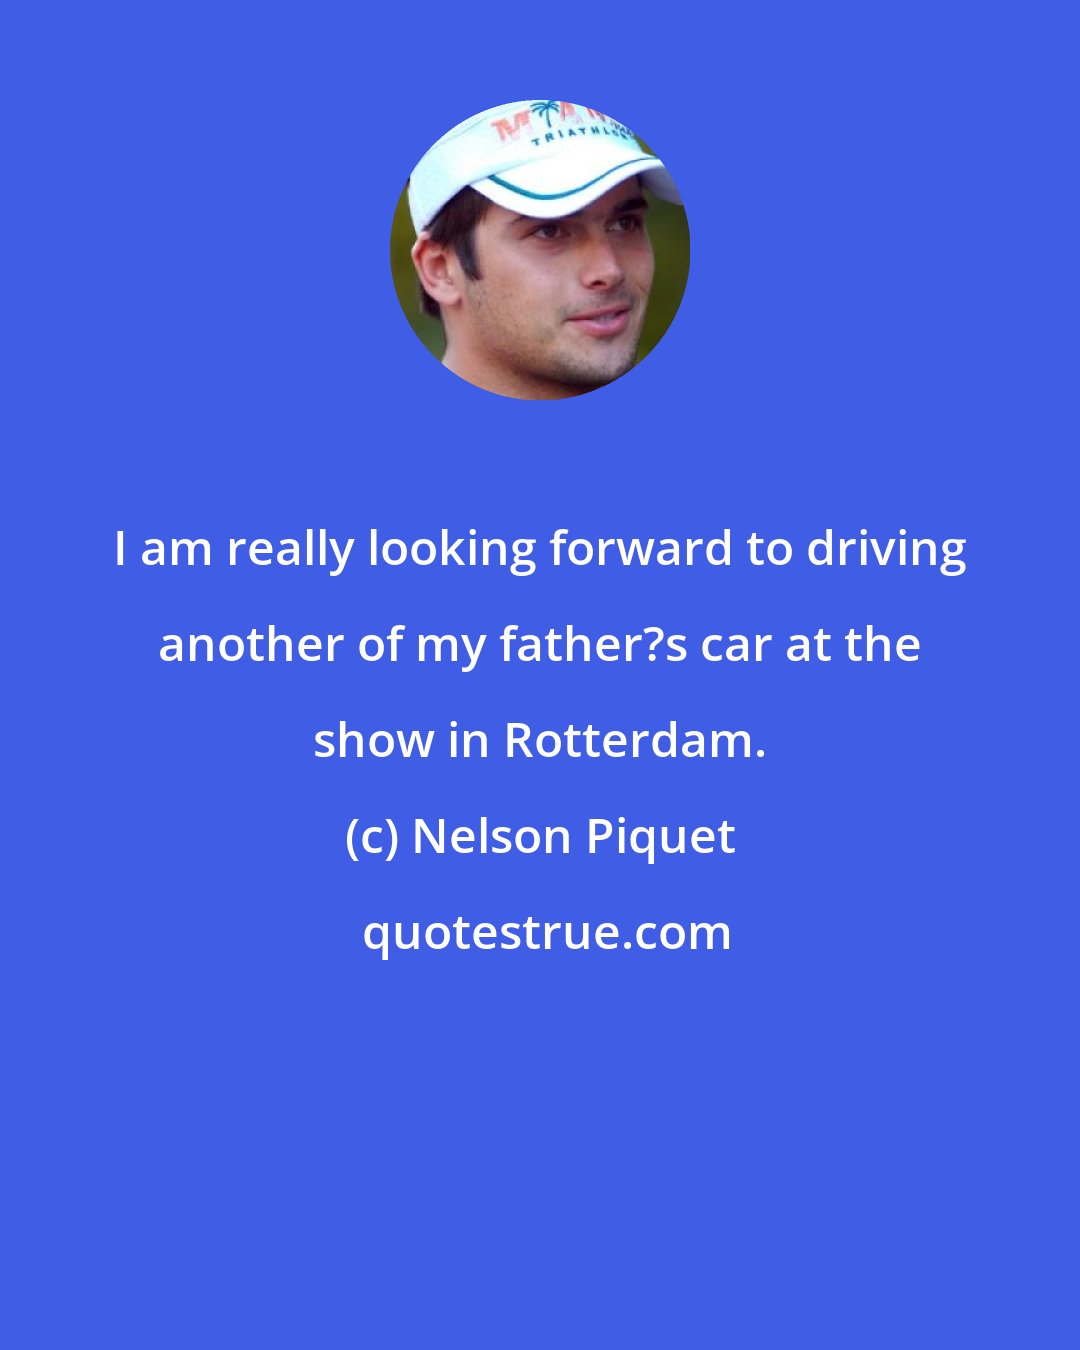 Nelson Piquet: I am really looking forward to driving another of my father?s car at the show in Rotterdam.